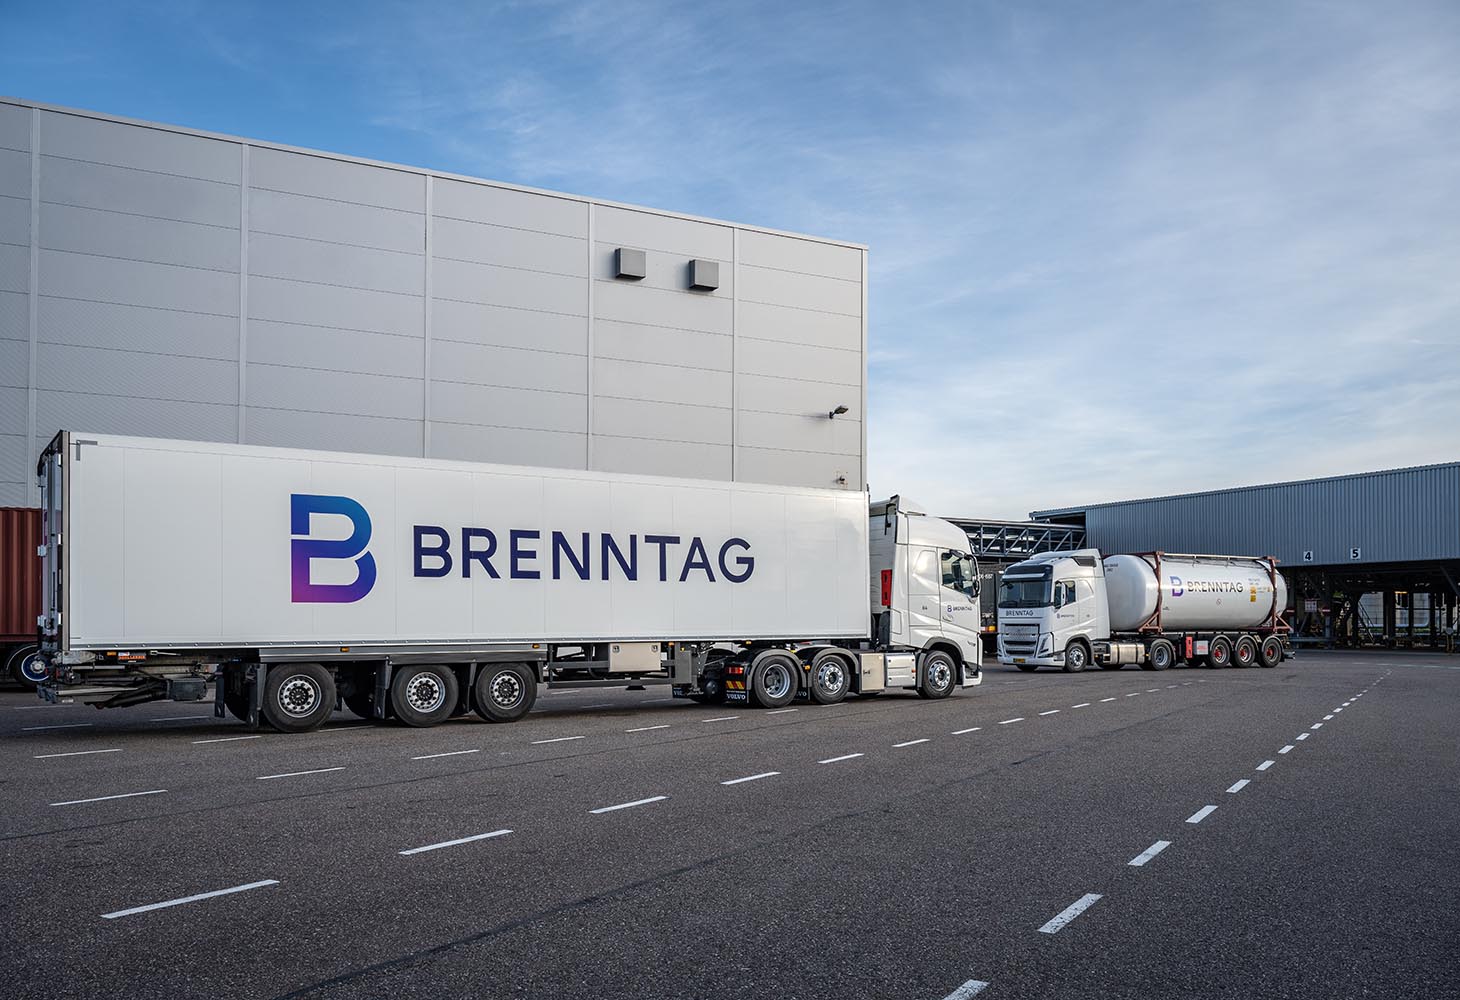 Univar Solutions confirms being approached by Brenntag